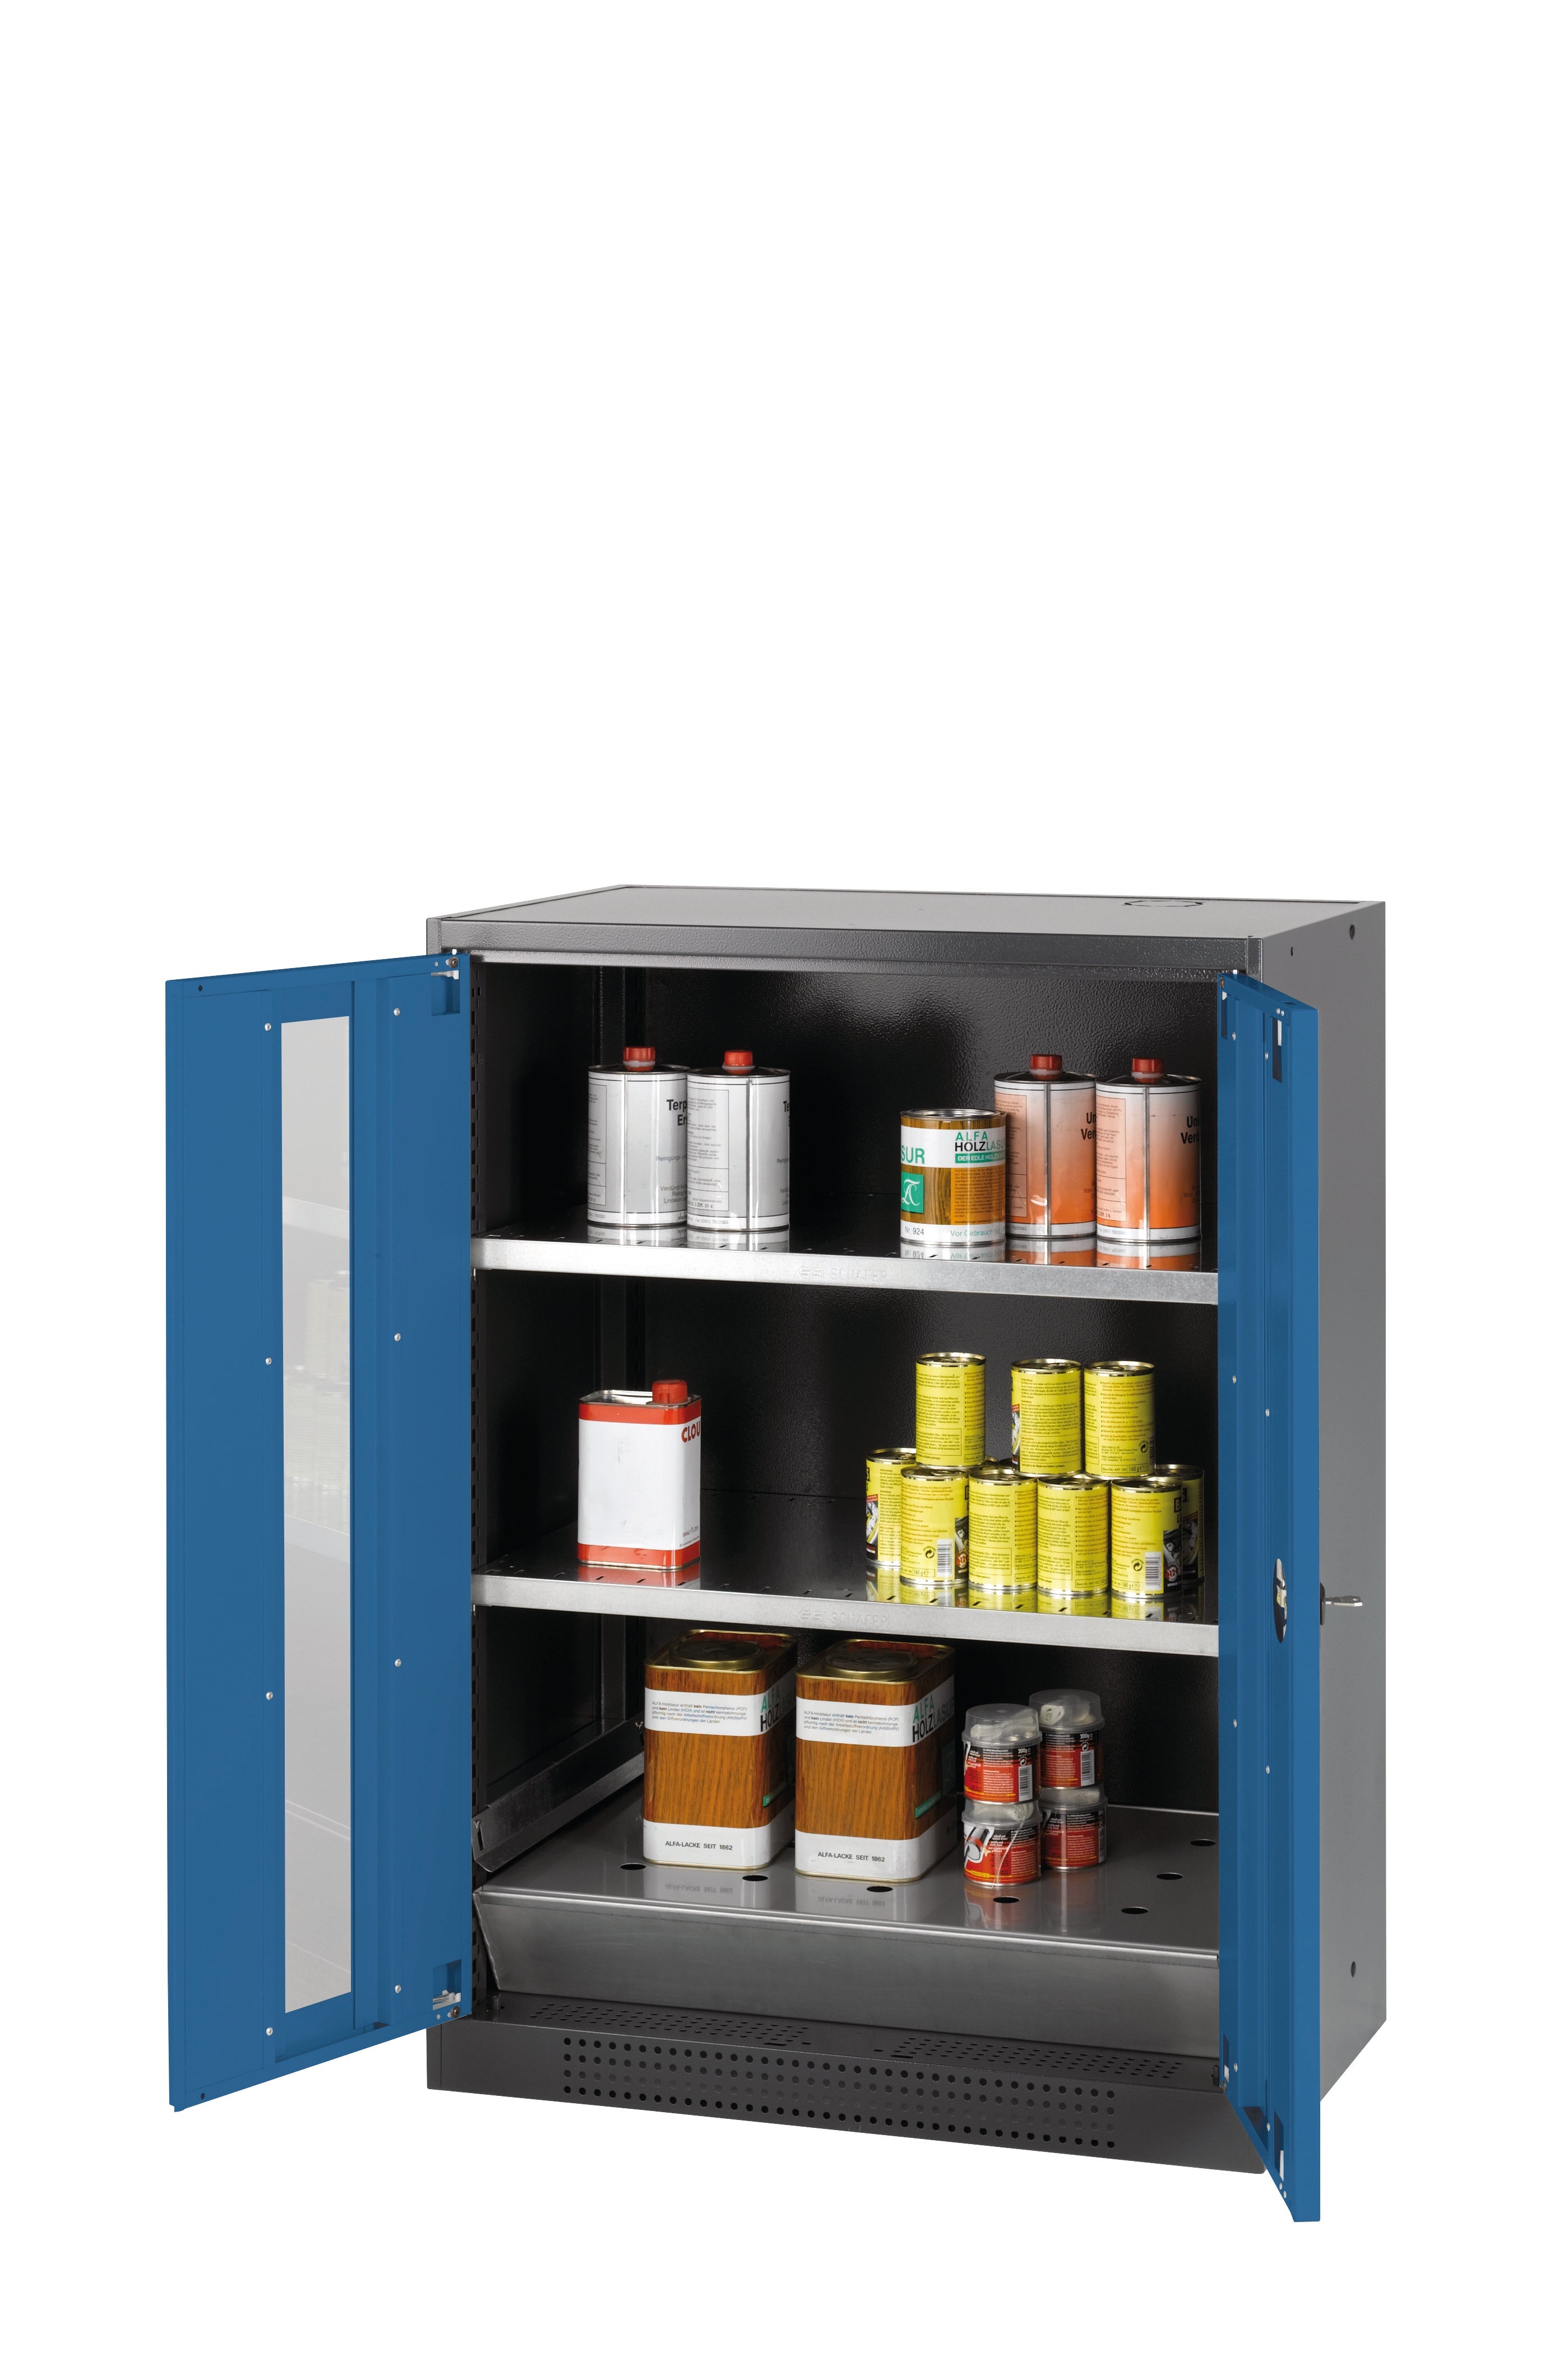 Chemical cabinet CS-CLASSIC-G model CS.110.081.WDFW in gentian blue RAL 5010 with 2x standard shelves (sheet steel)